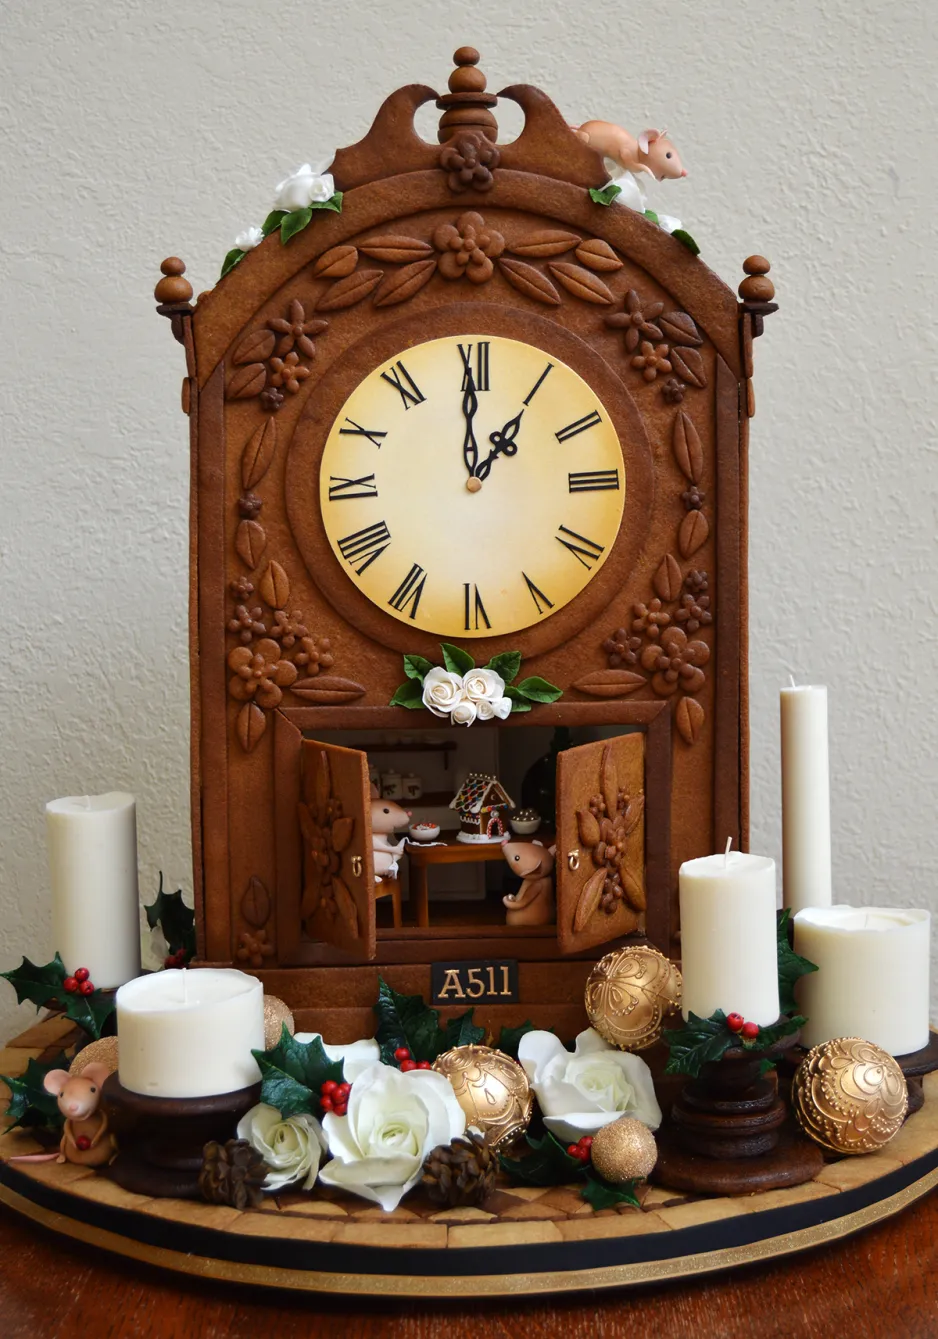 An antique-looking clock made entirely of gingerbread, with sugar decorations.